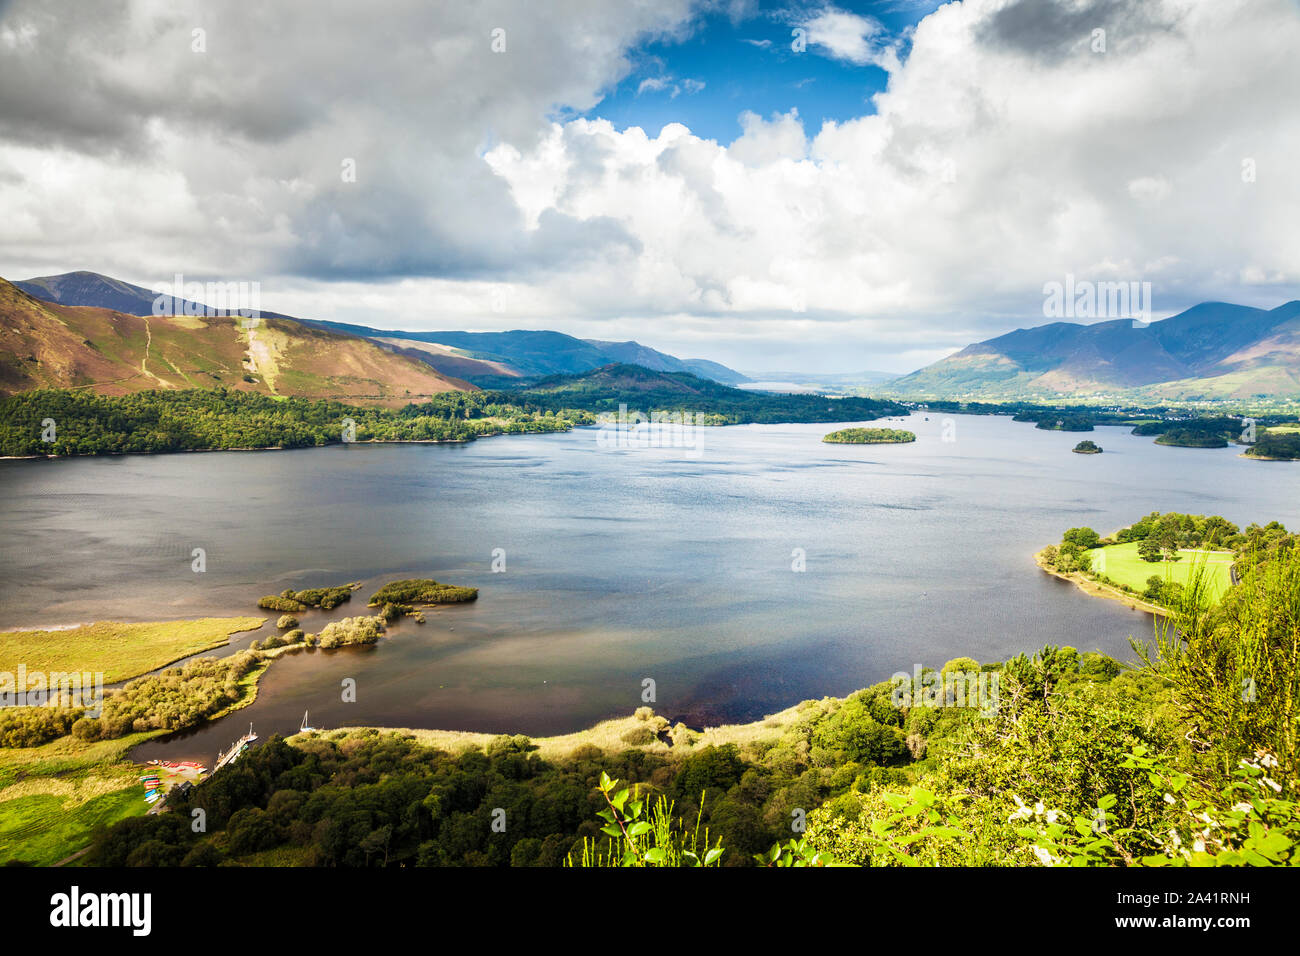 The iconic view over Derwent Water taken from Surprise View. Stock Photo